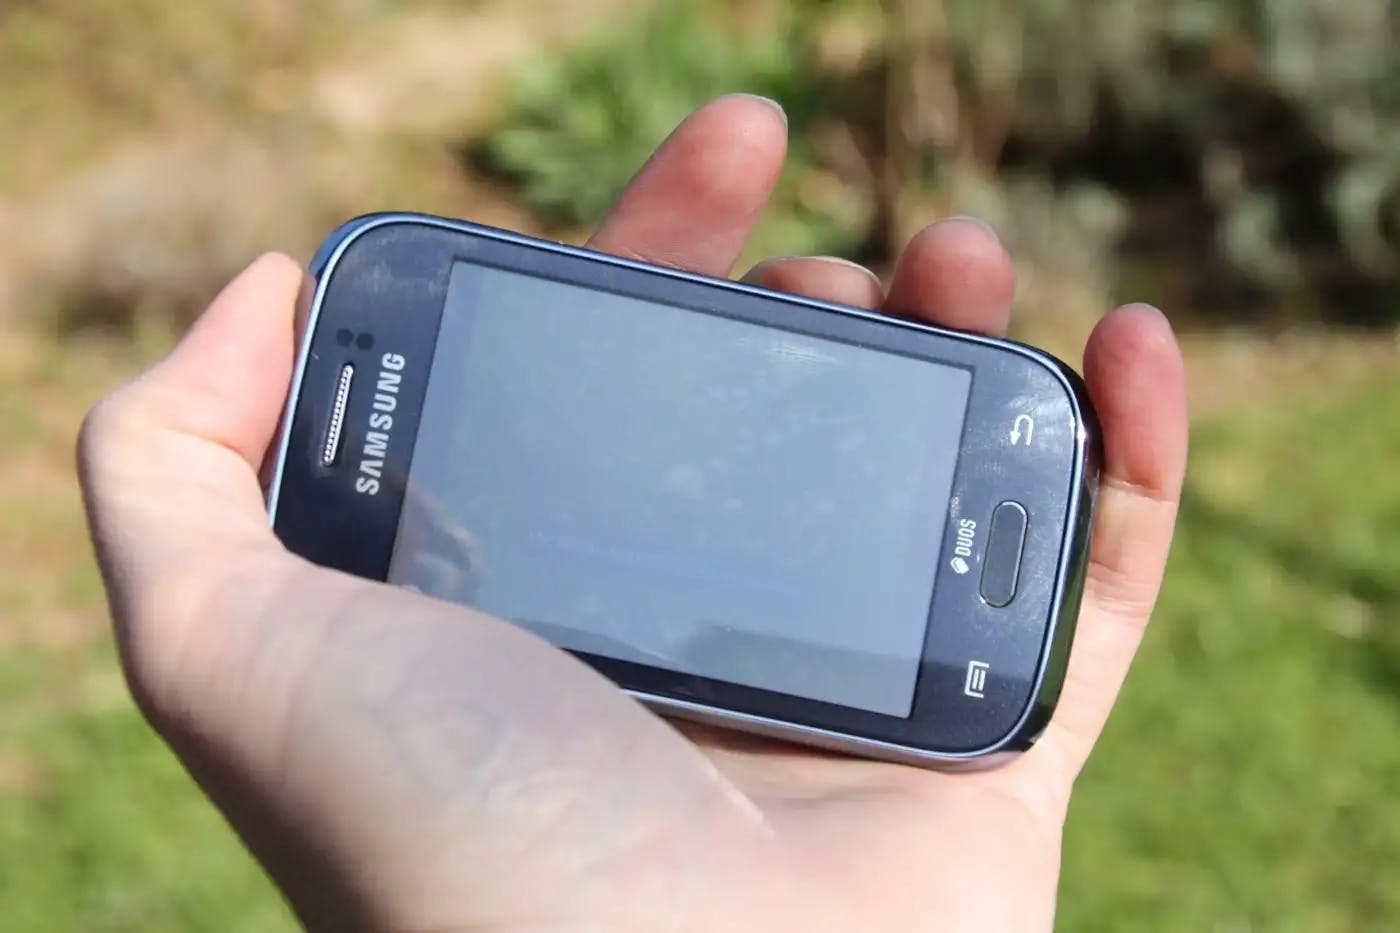 This is a picture of the Samsung Galaxy Young. Photo credit: (https://www.notebookcheck.net/)